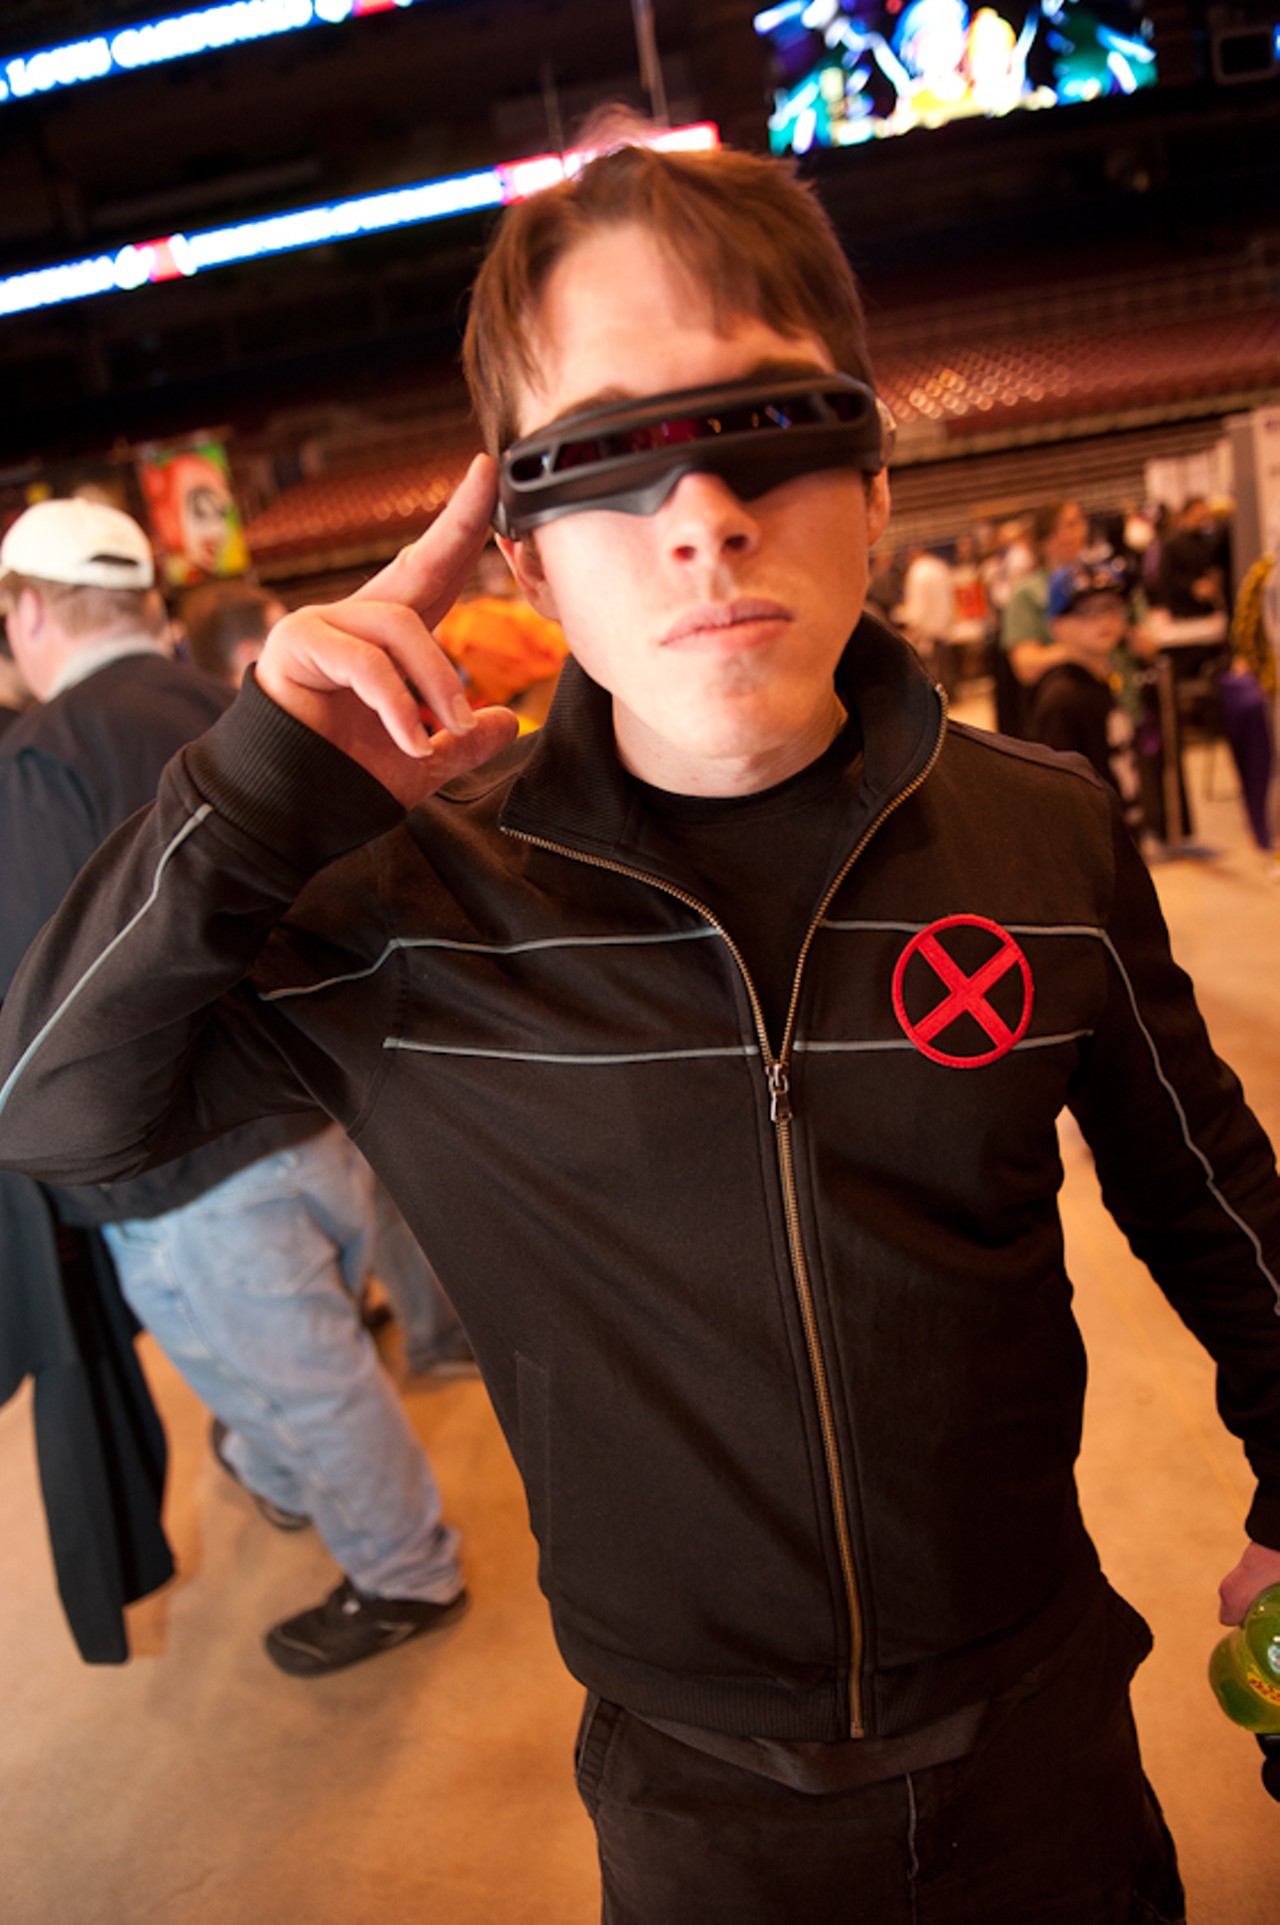 Cyclops, part of the X-Men universe. X-Men: Days of Future Past is one of our ten must-see movies of 2014.